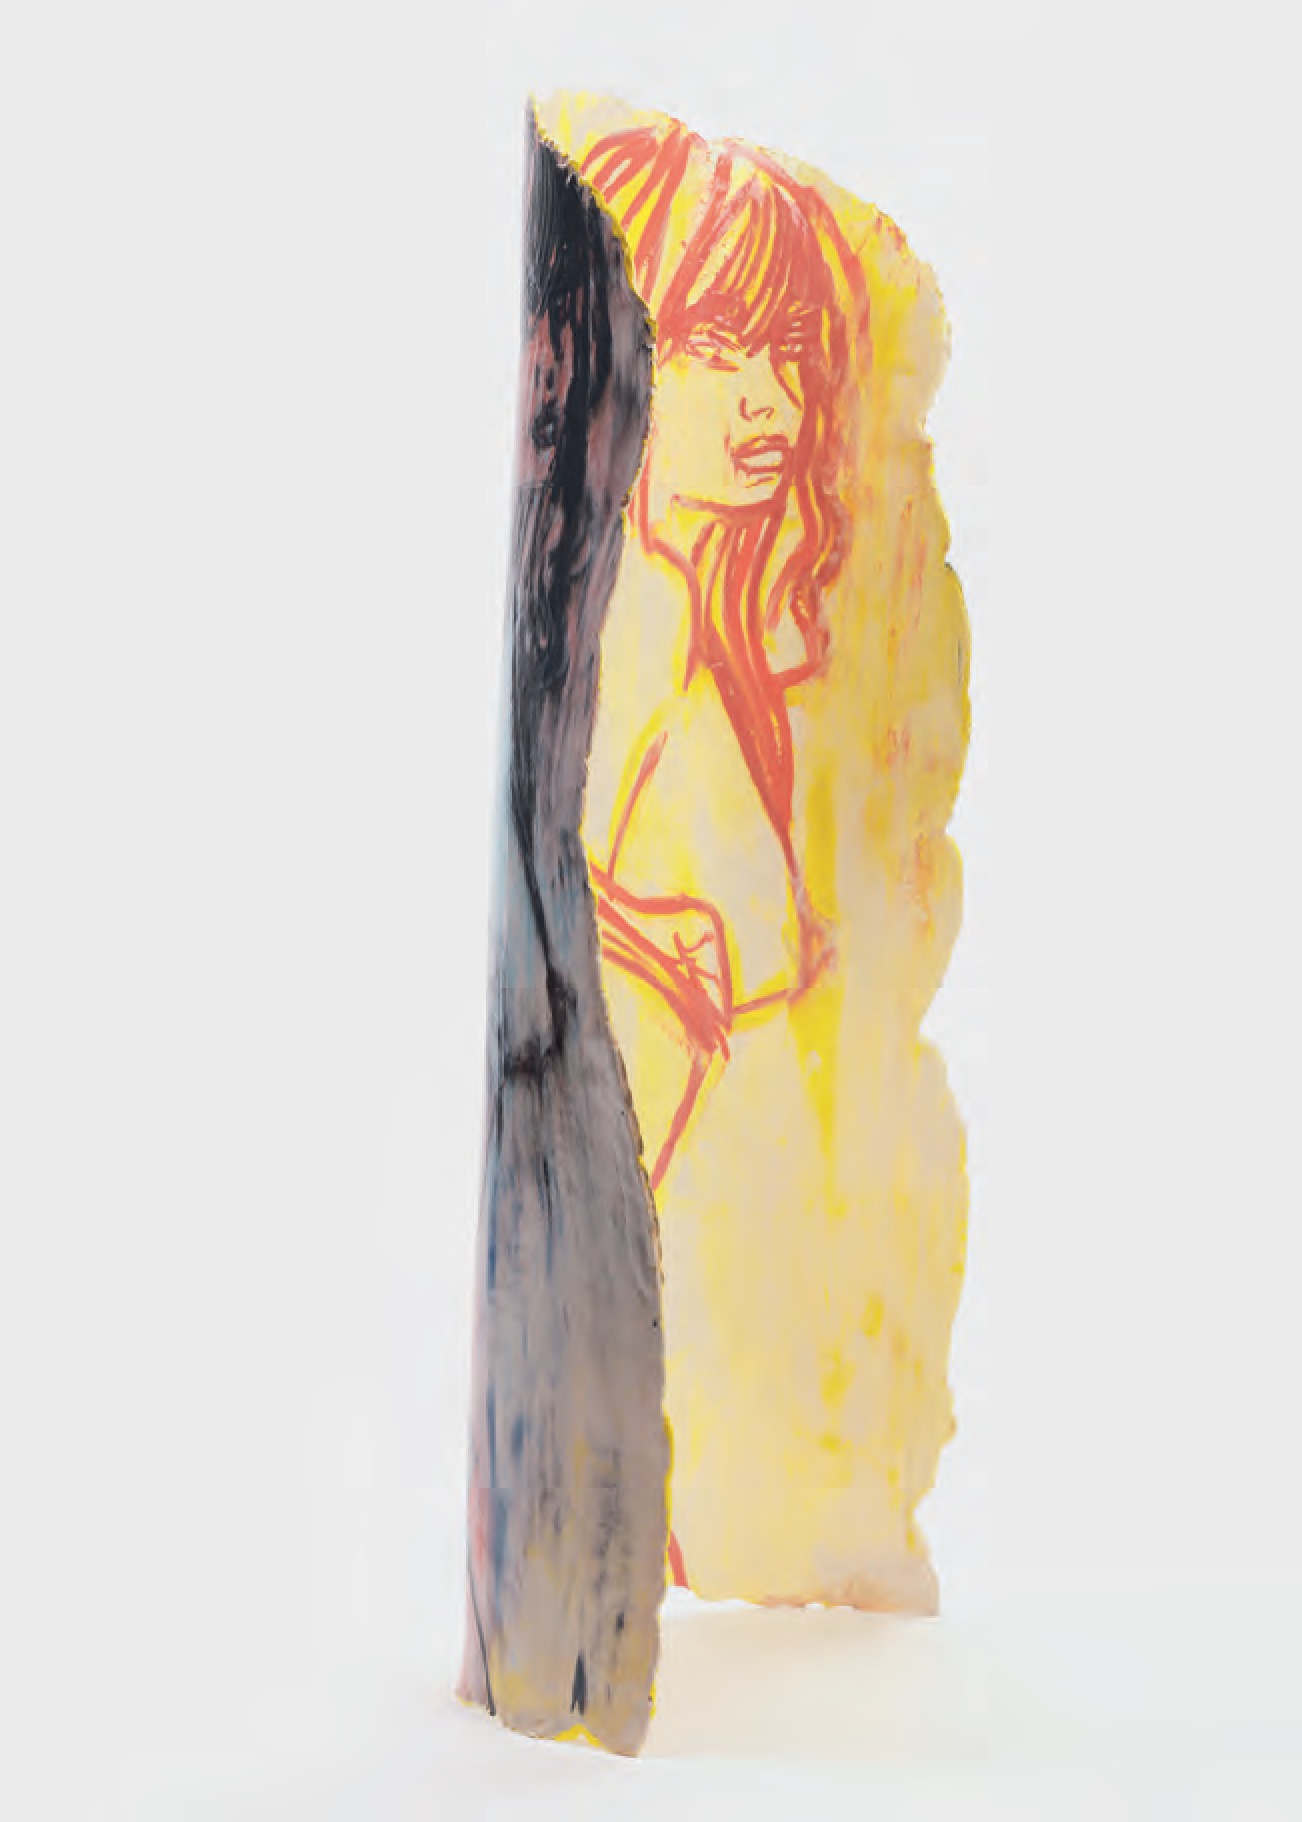 Standing Girl in Yellow, 2015 Ceramic - Ghada Amer - courtesy the artist and Cheim & Read